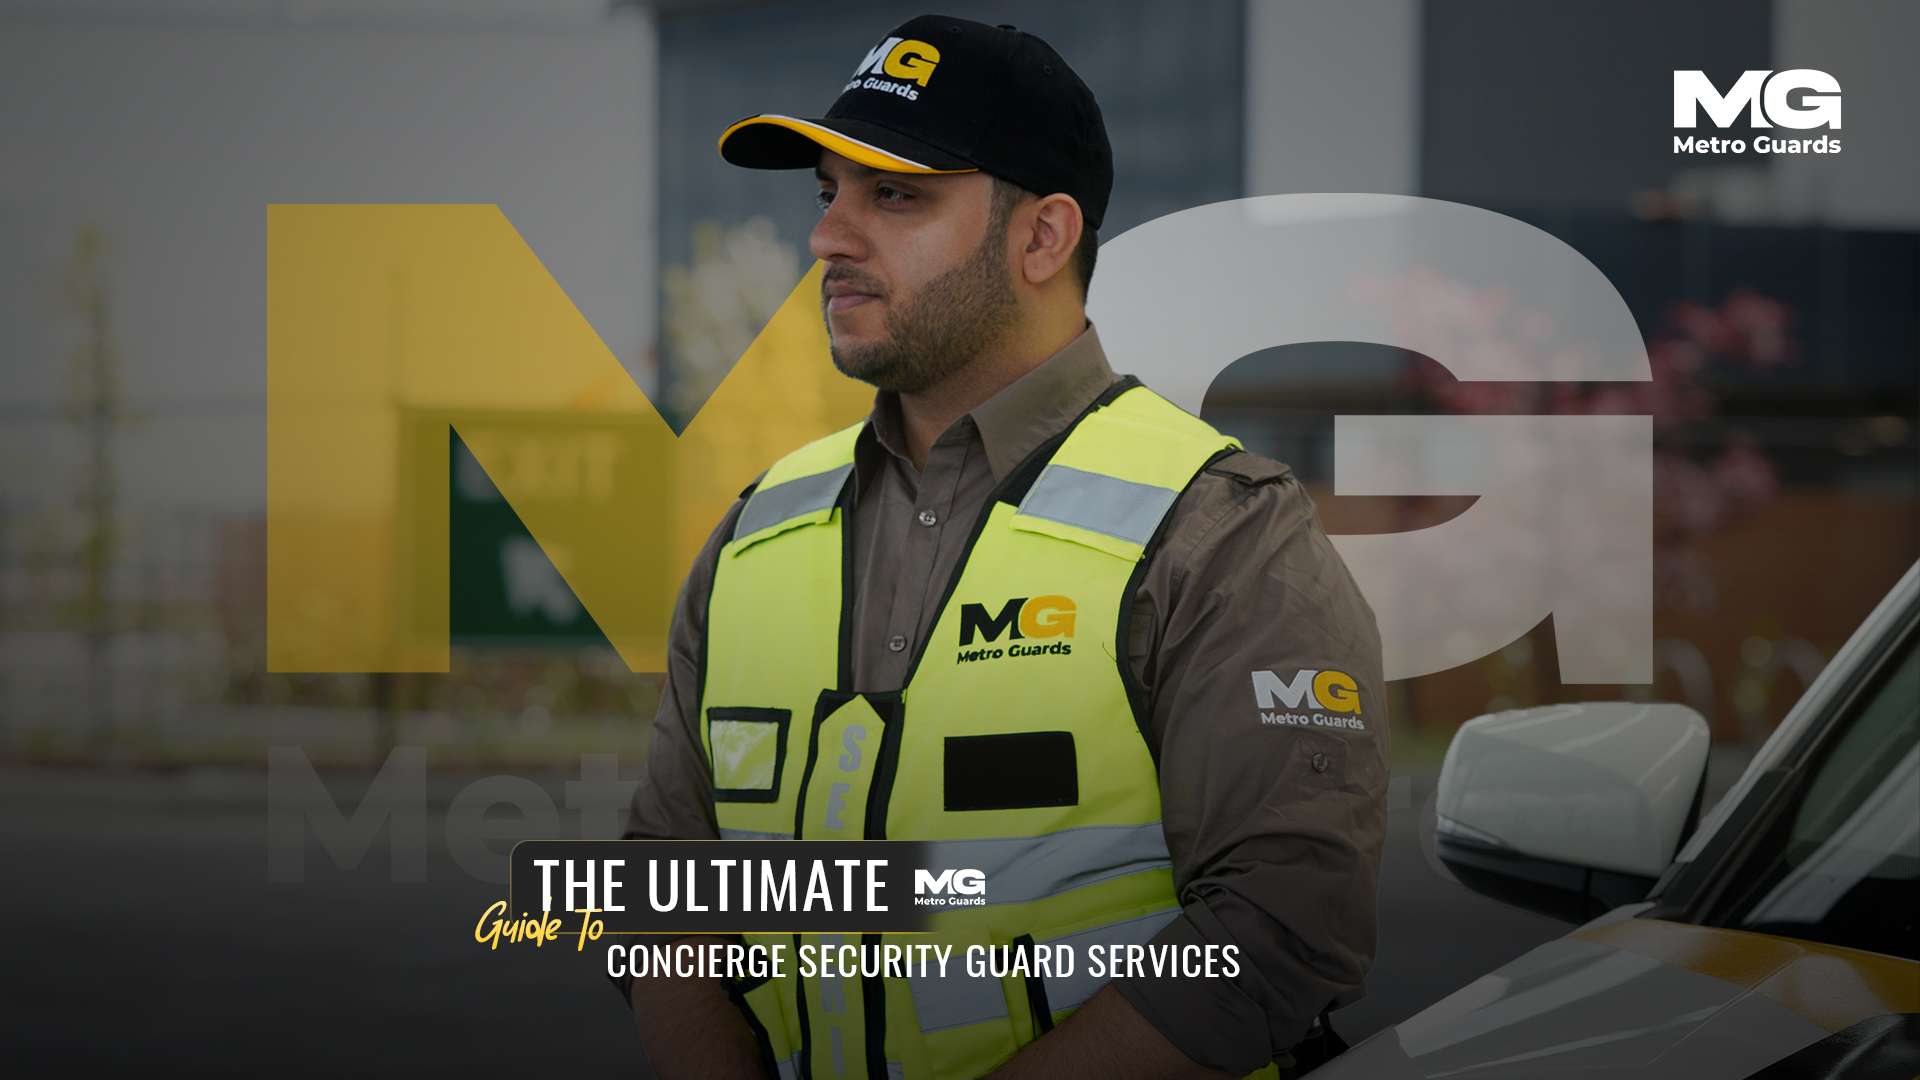 The Ultimate Guide to Concierge Security Guard Services